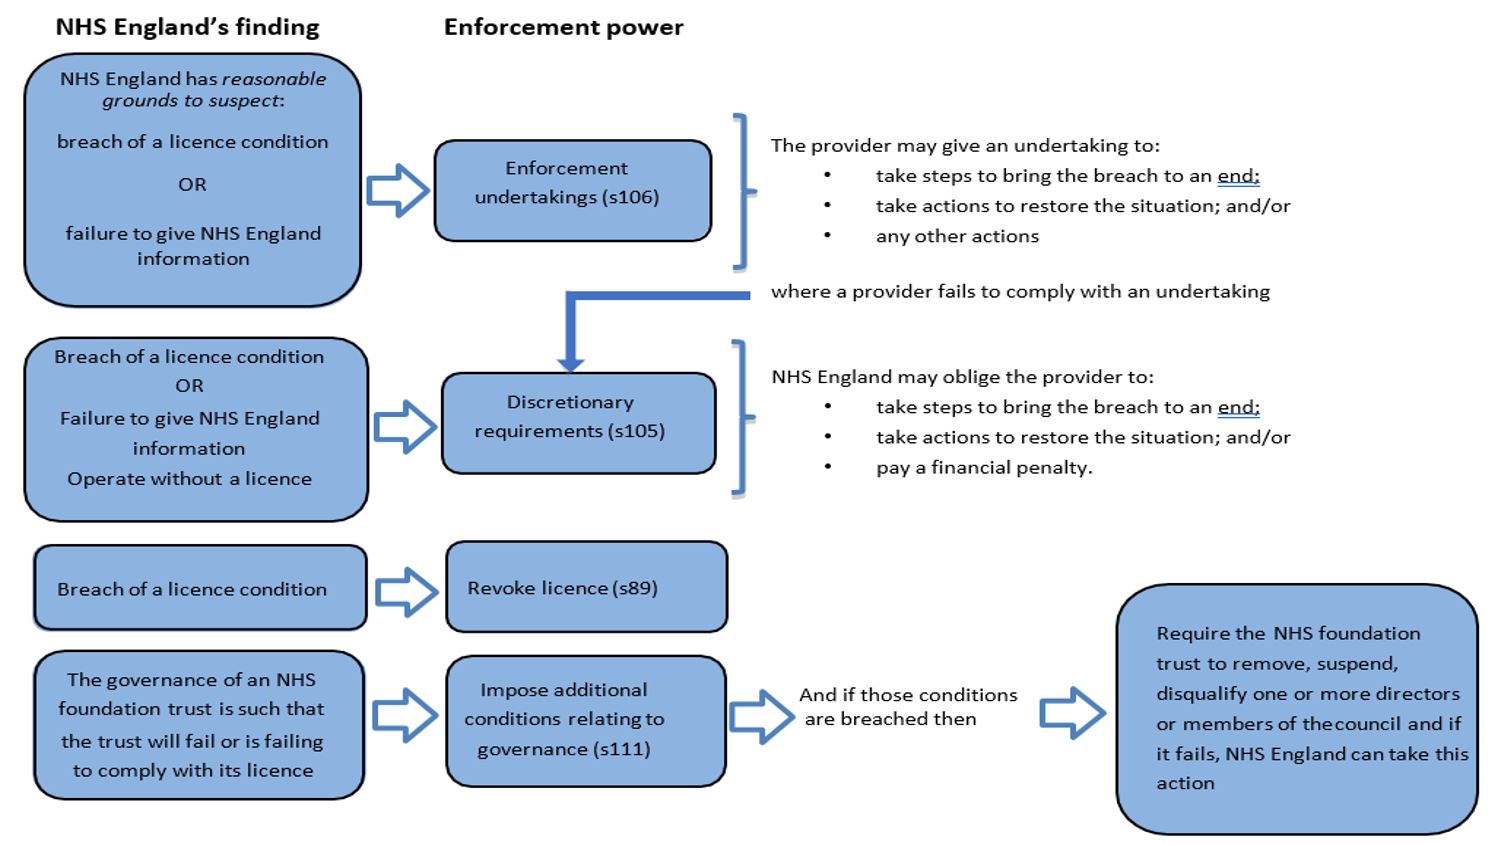 Overview of NHS England’s formal provider enforcement powers